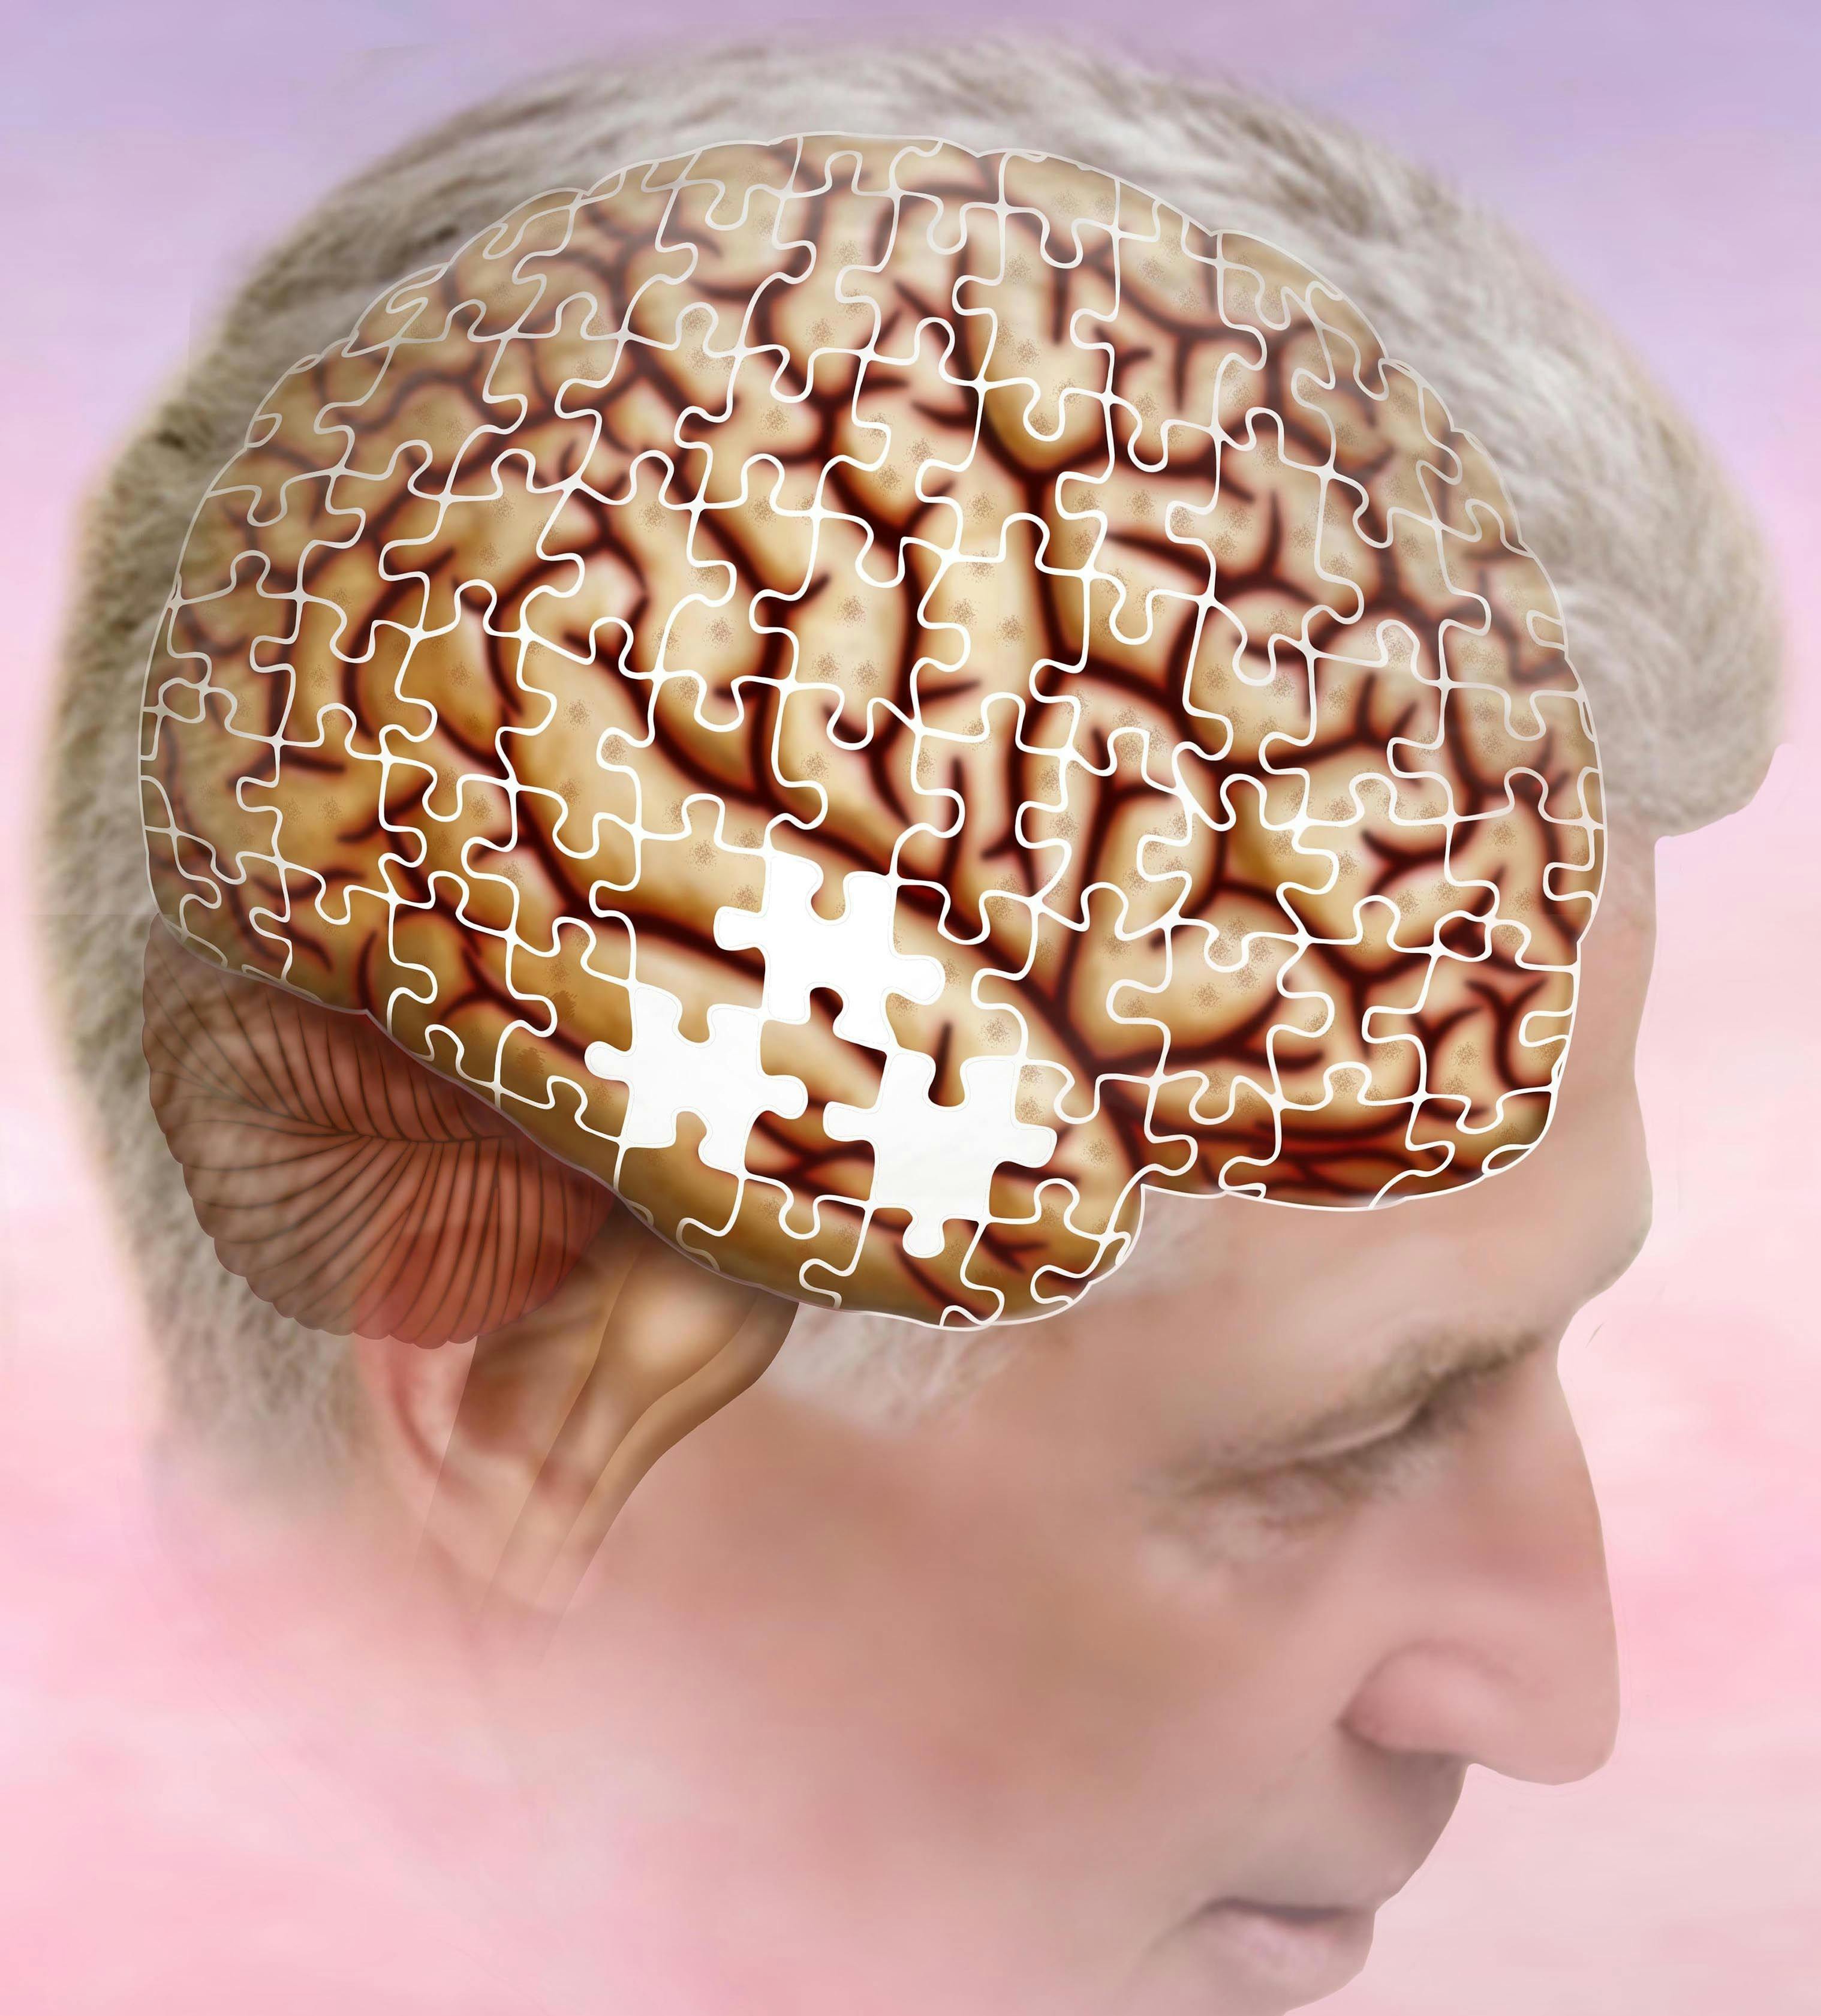 Short-Term Memory Recall Decline in AYA Cancer Survivors May Lead to an Increased Risk of Dementia, Alzheimer's